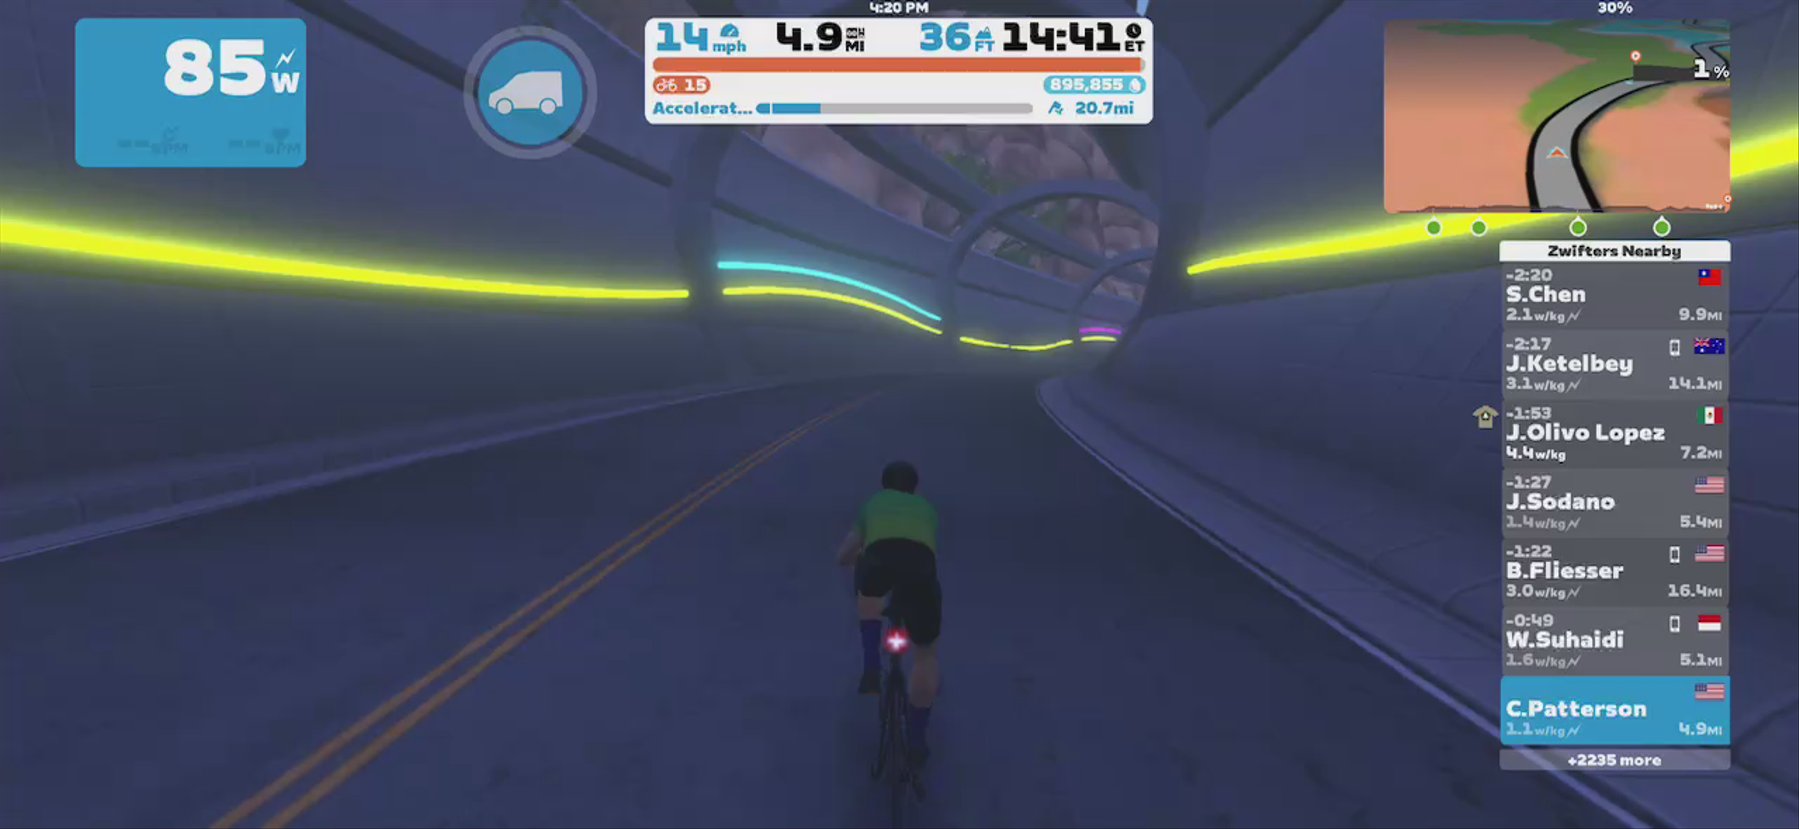 Zwift - Accelerate to Elevate in Watopia